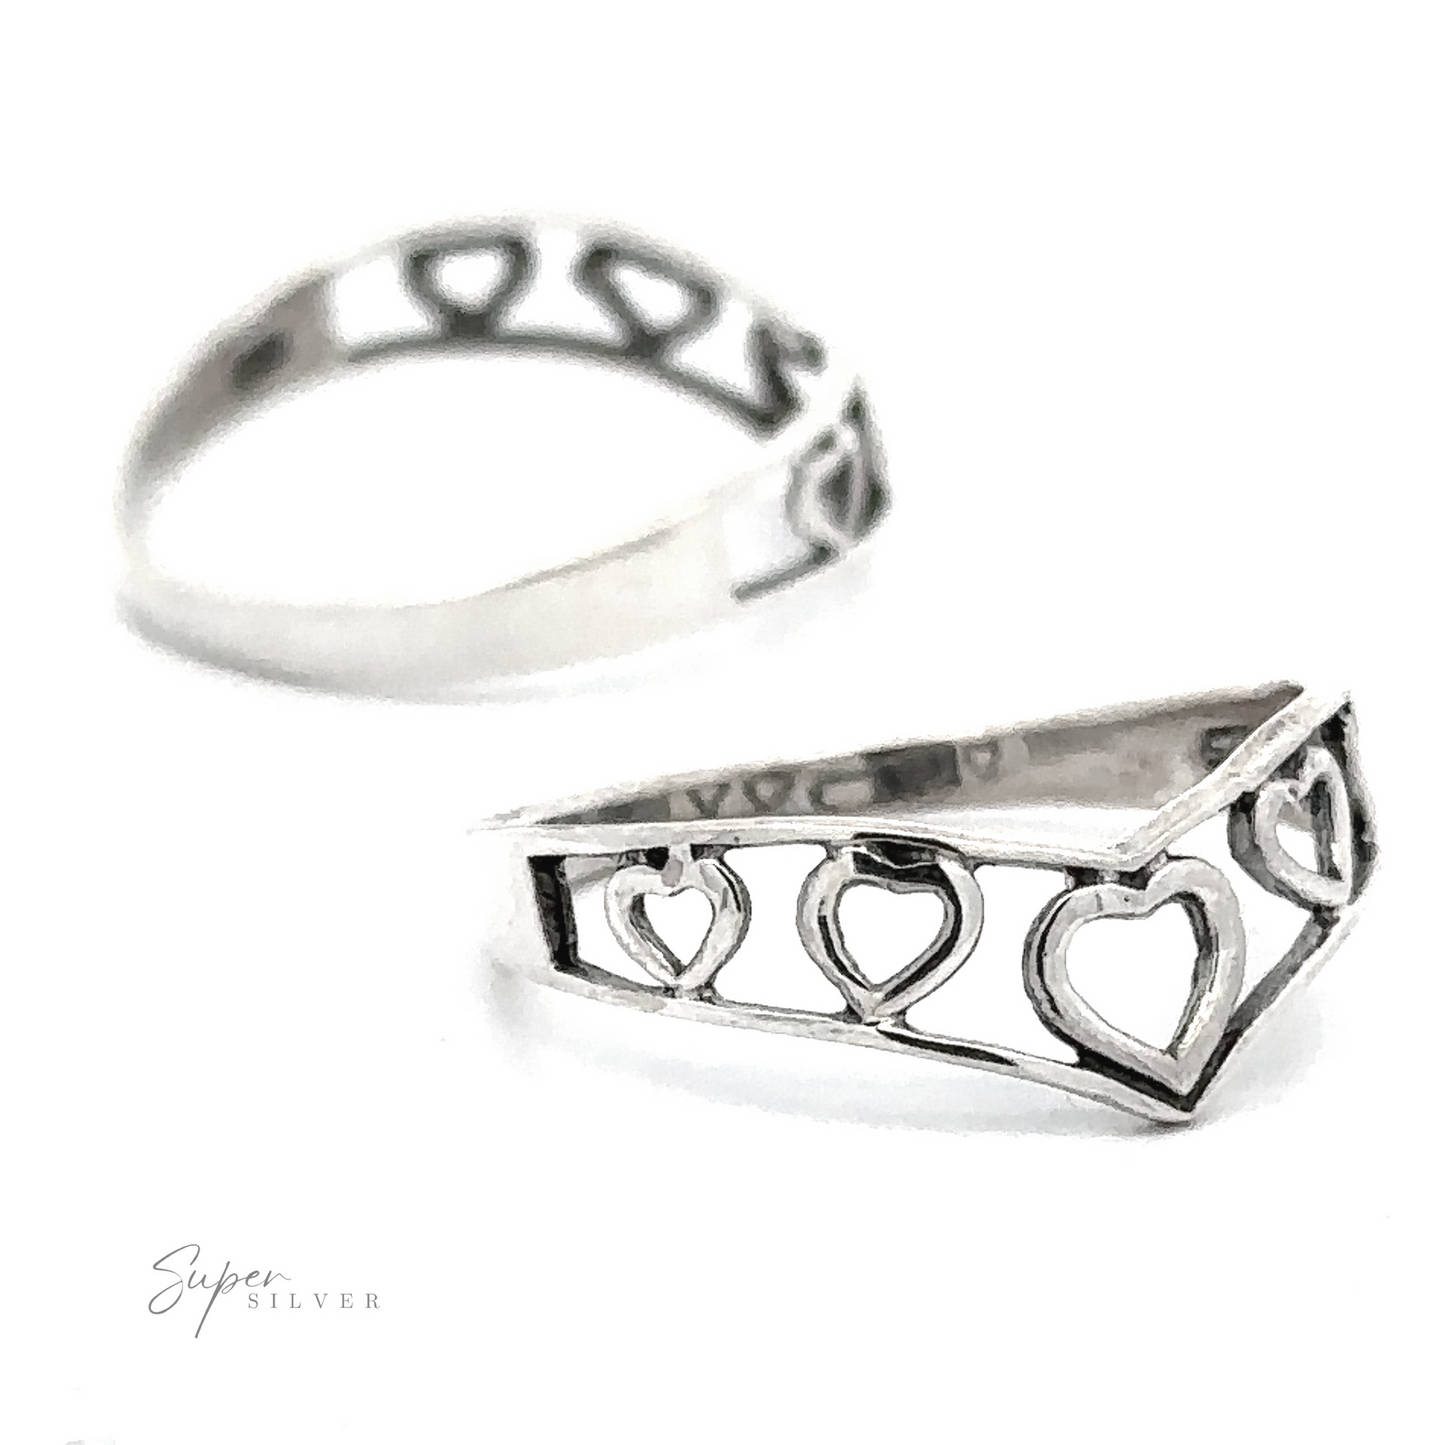 Chevron Shaped Open Heart Band featuring a row of heart cut-outs, displayed against a white background with a blurred "super silver" signature at the bottom.